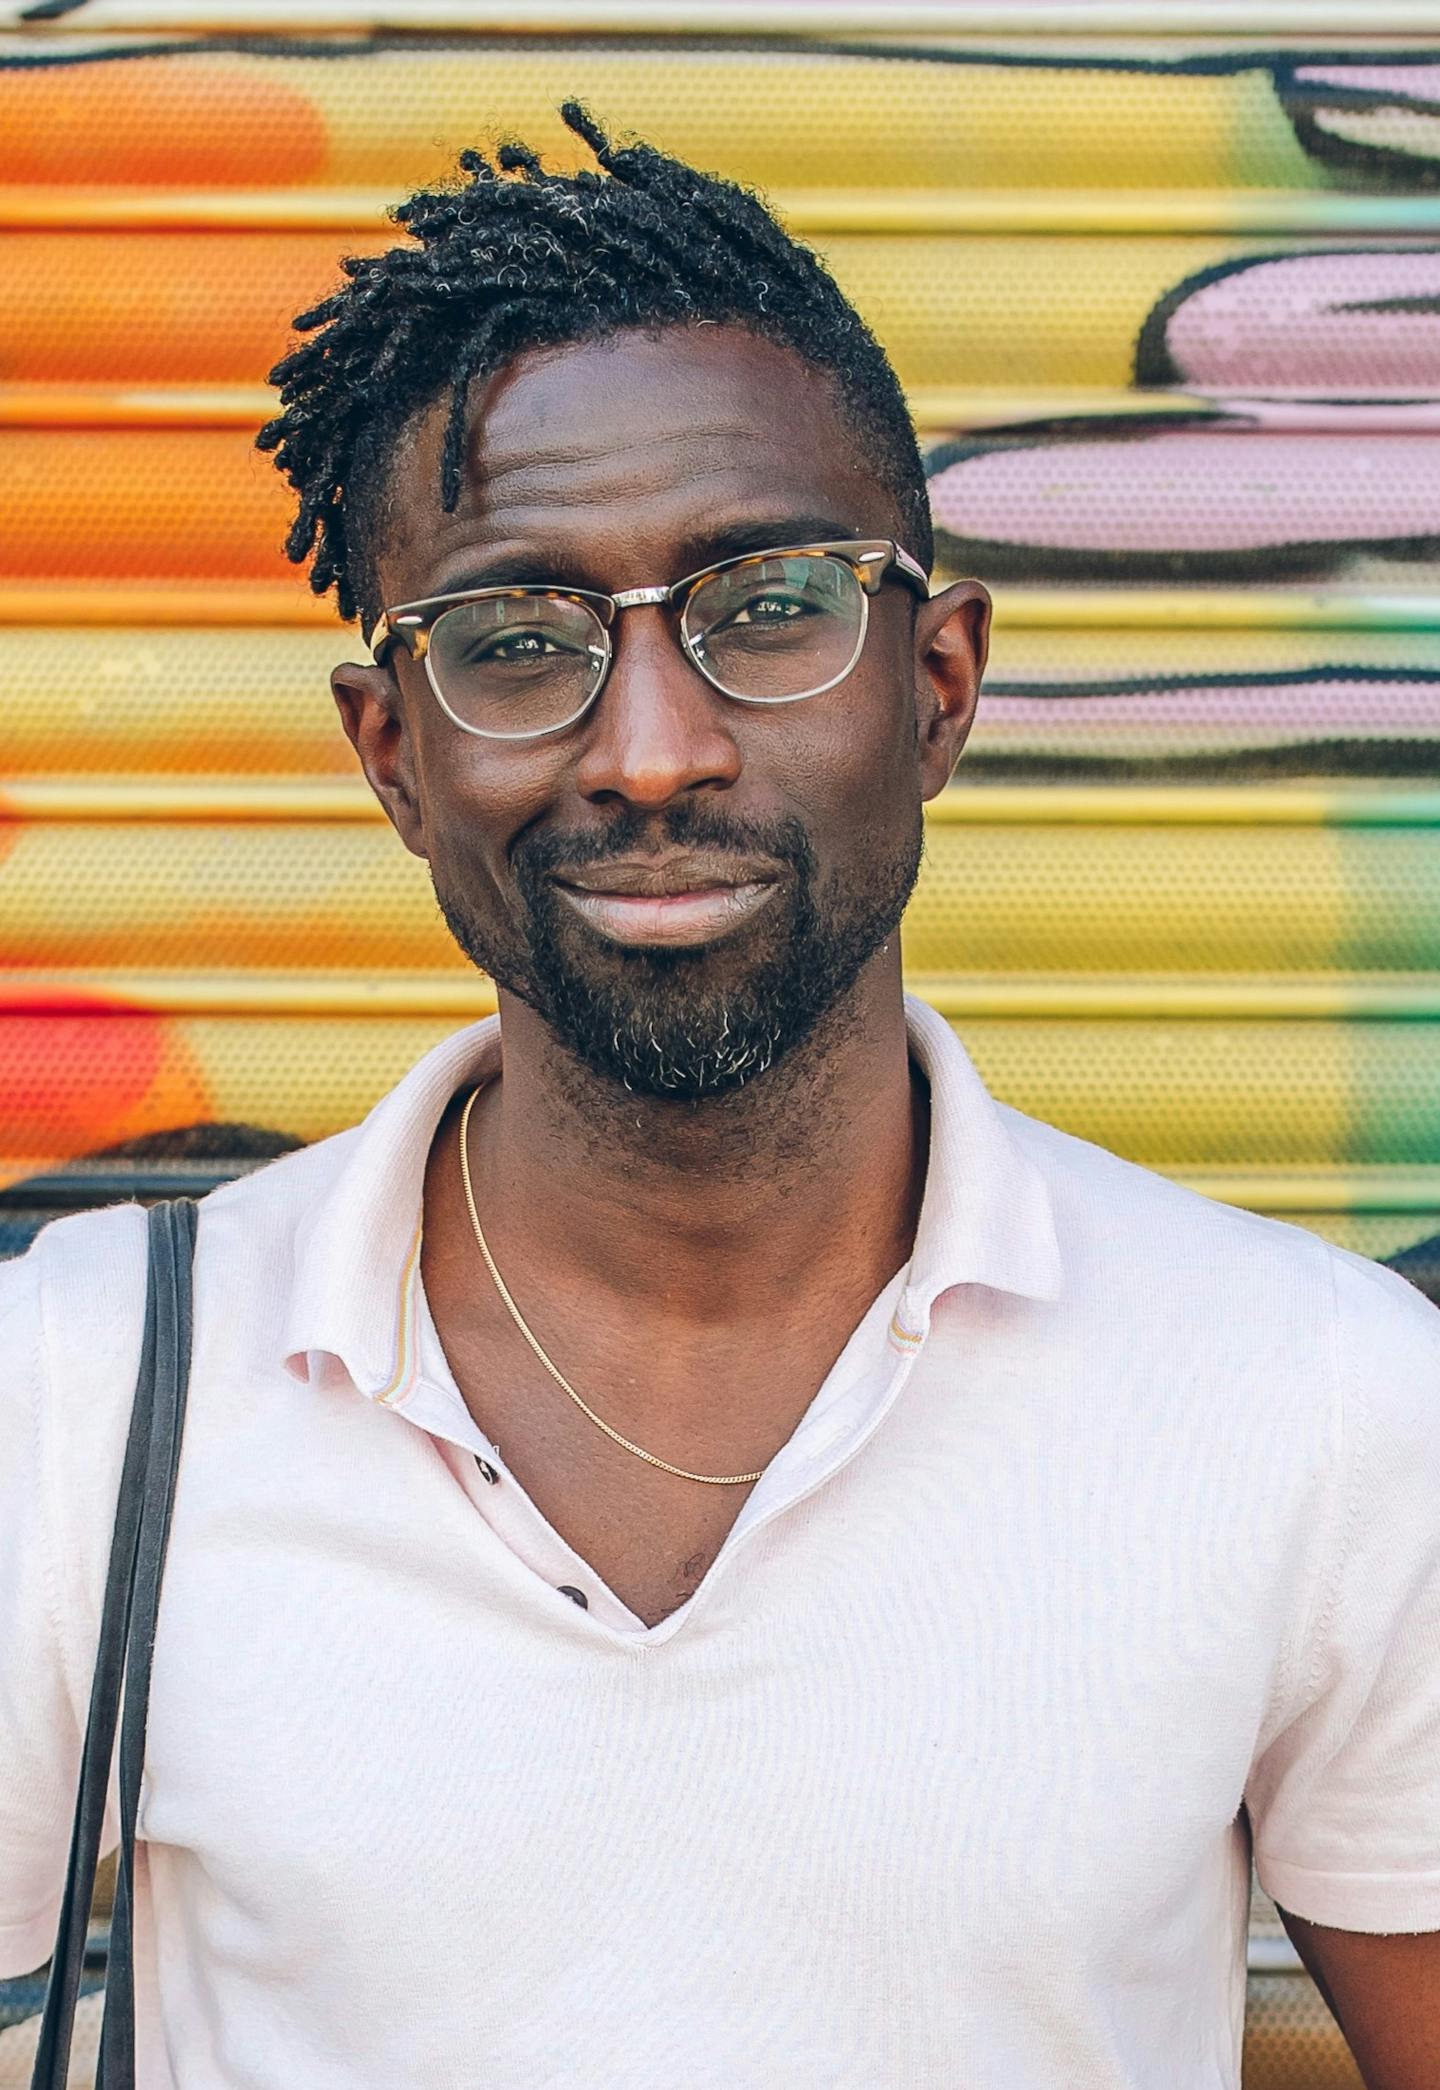 Jeffrey, a fortysomething black man, is standing in front of a a colourful grafittied wall. He is wearing glasses and a pink top. His hair is in locs.